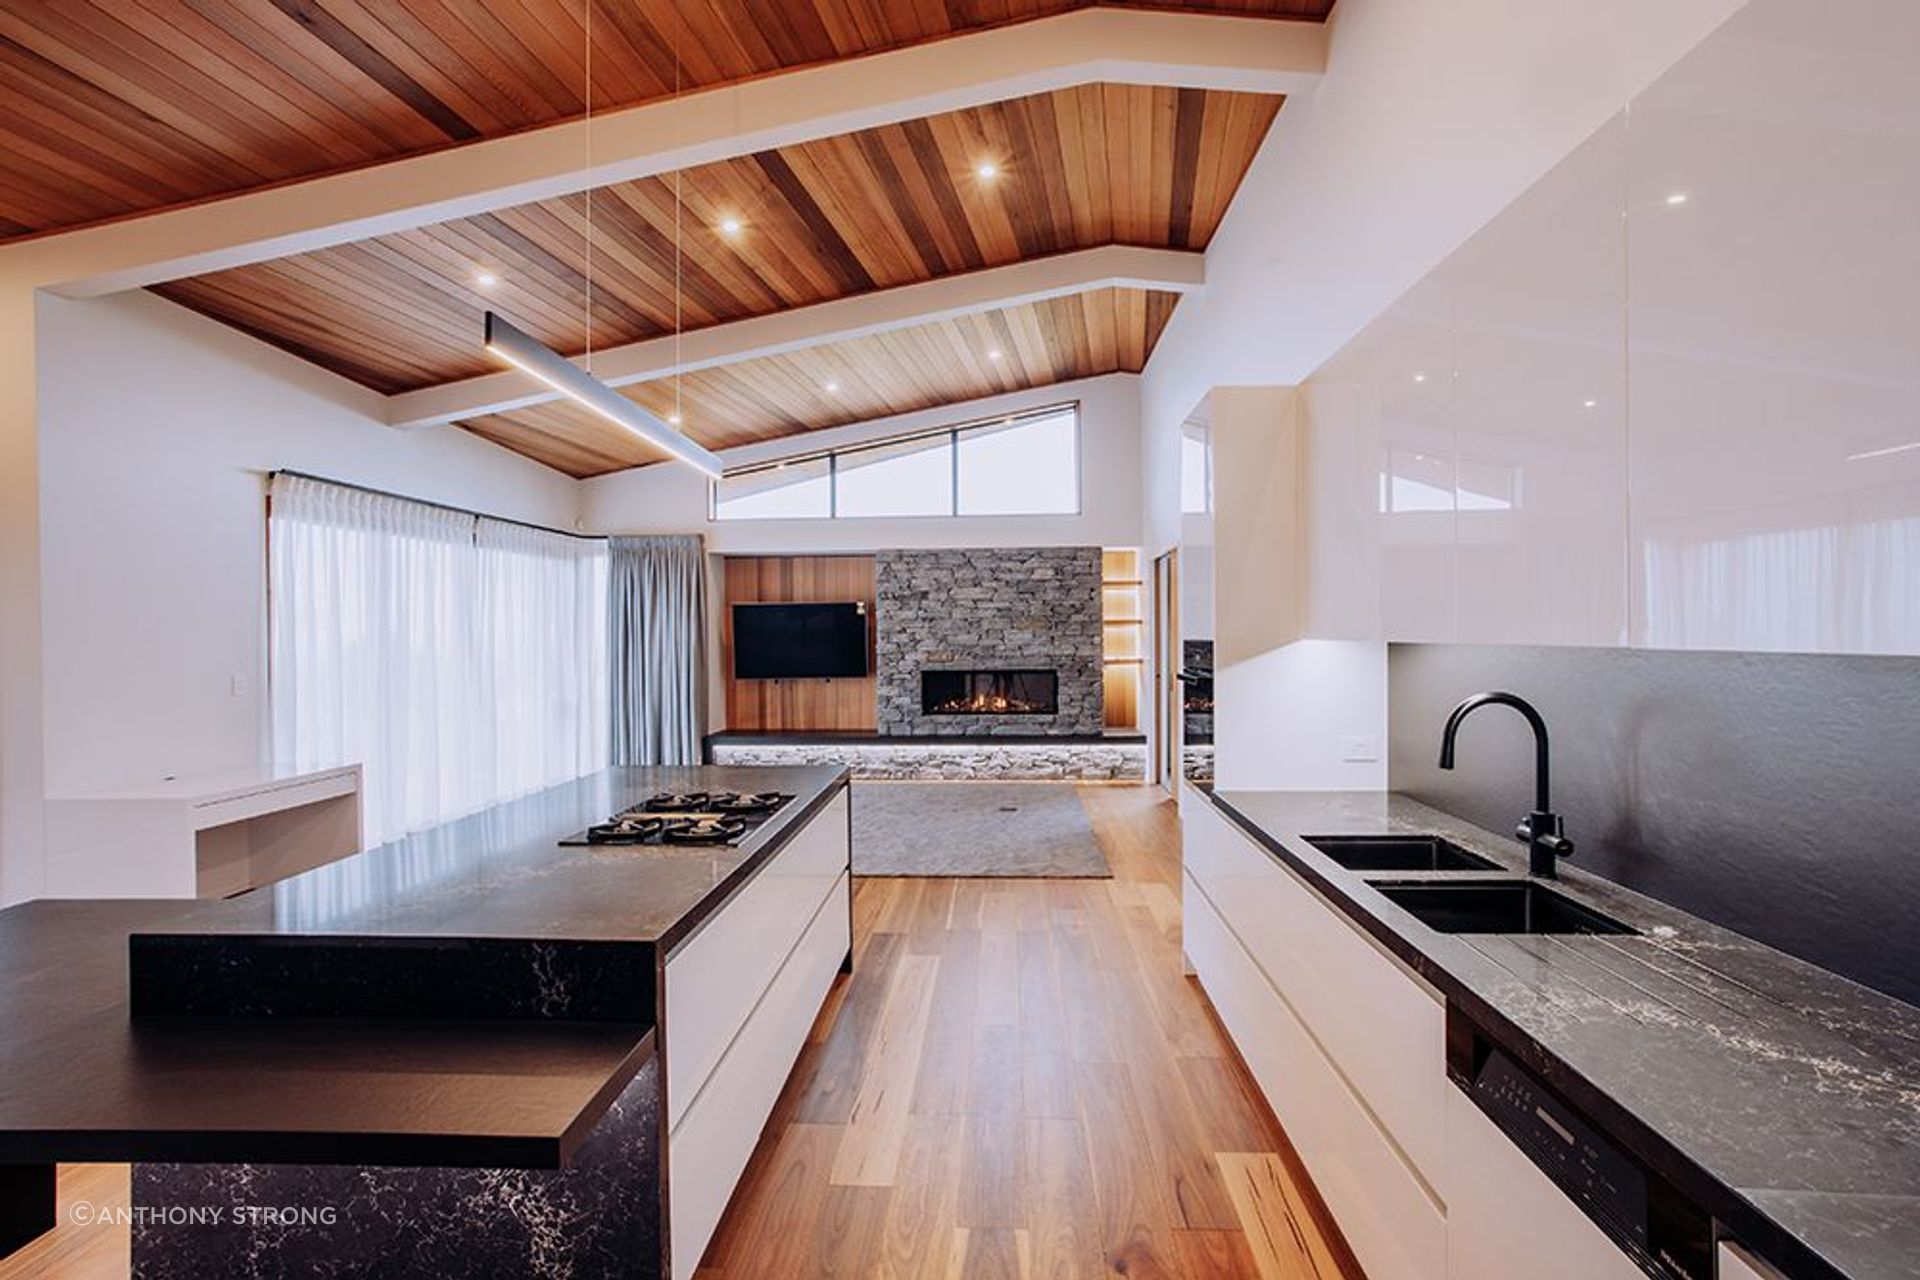 Warm timber accents and generous sunlight stream in through the expansive windows of the living wing. A Kitchen Area designed for entertaining the whole family, the open floor plan allows for a sense of sense of spaciousness.